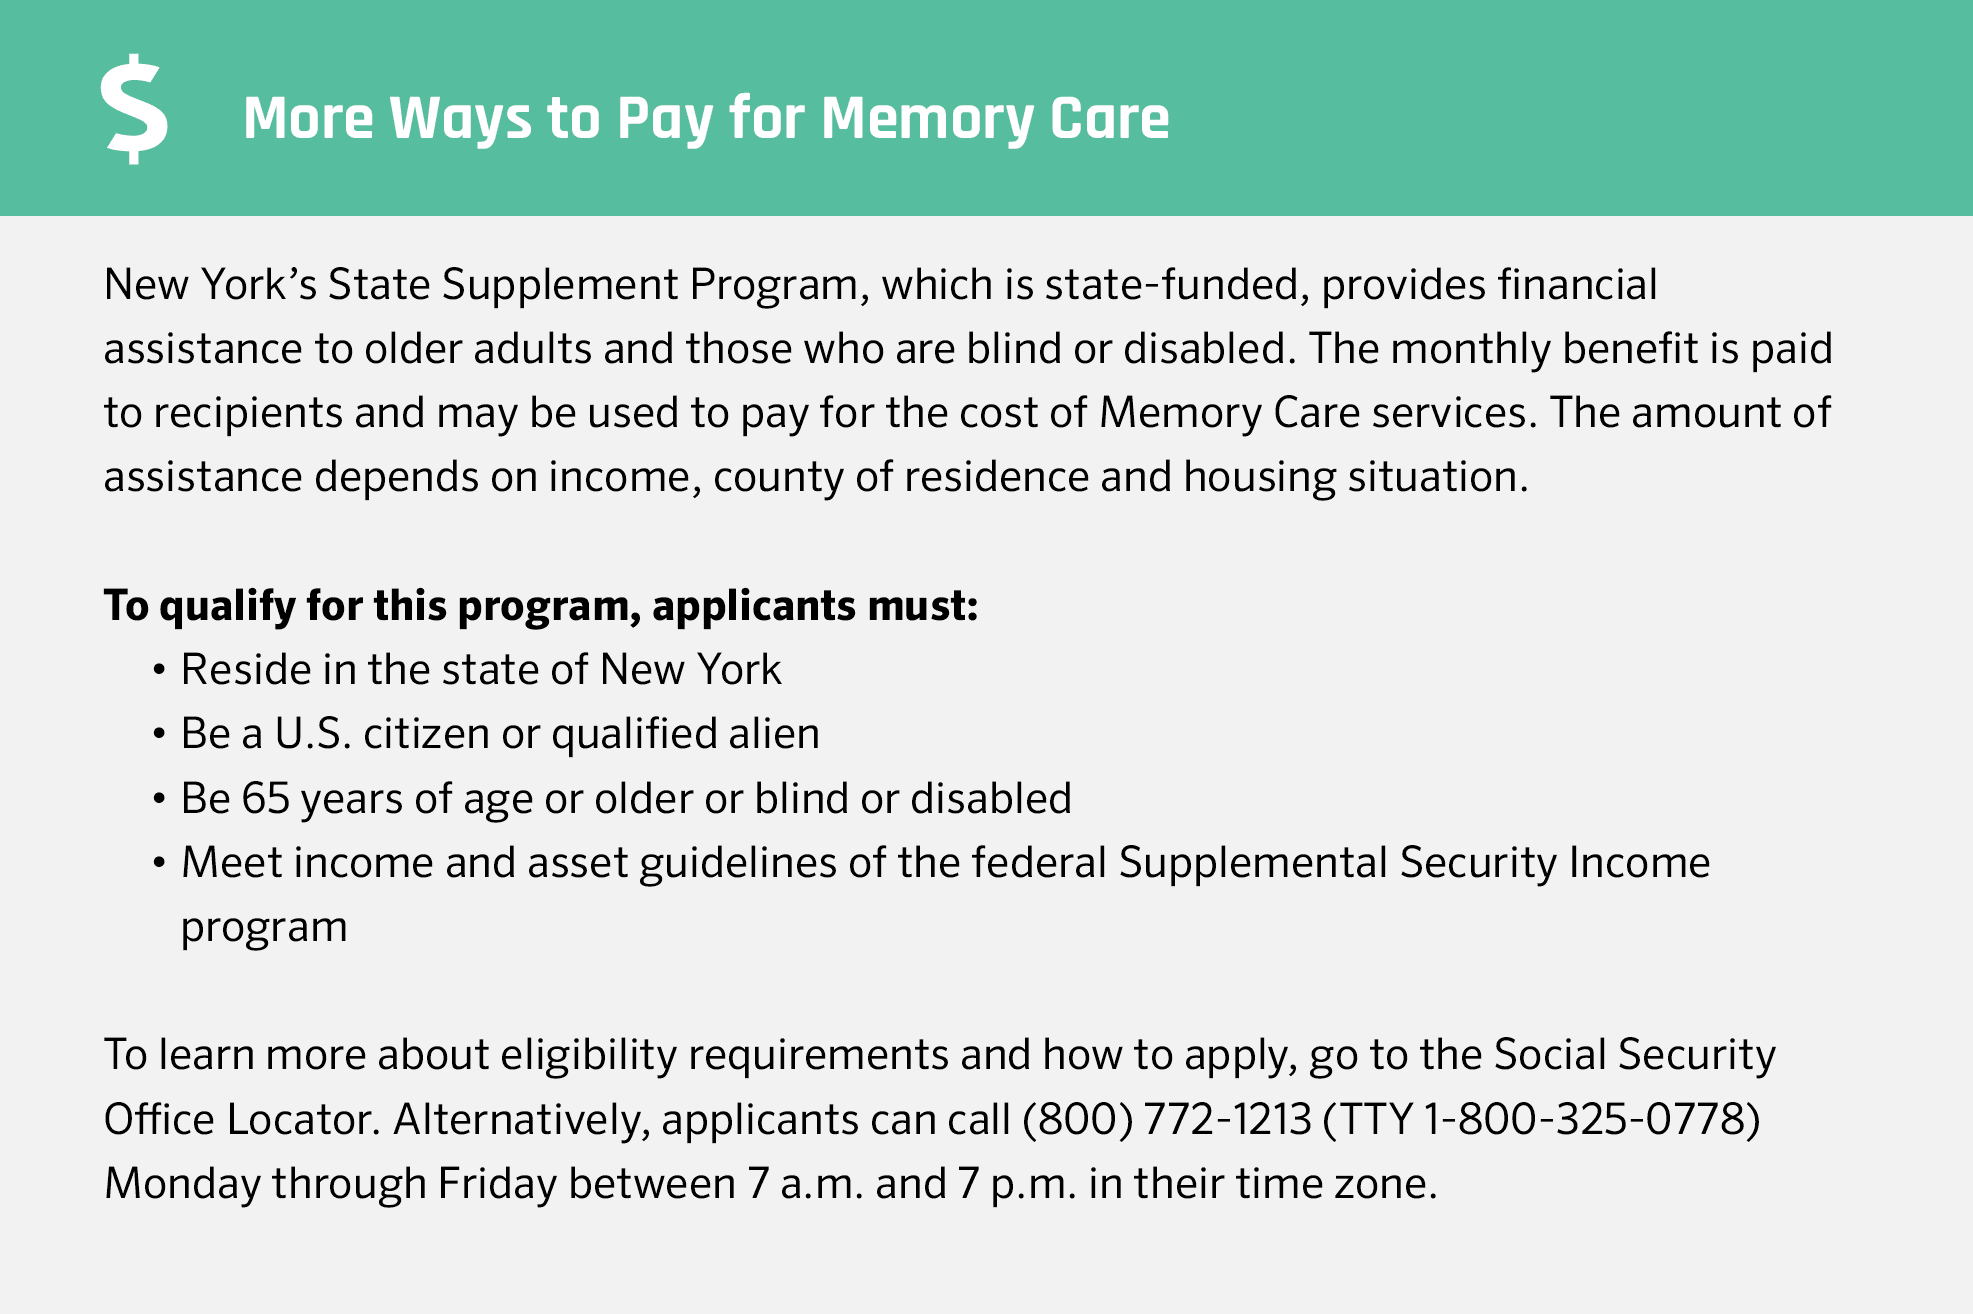 More ways to pay for memory care in New York